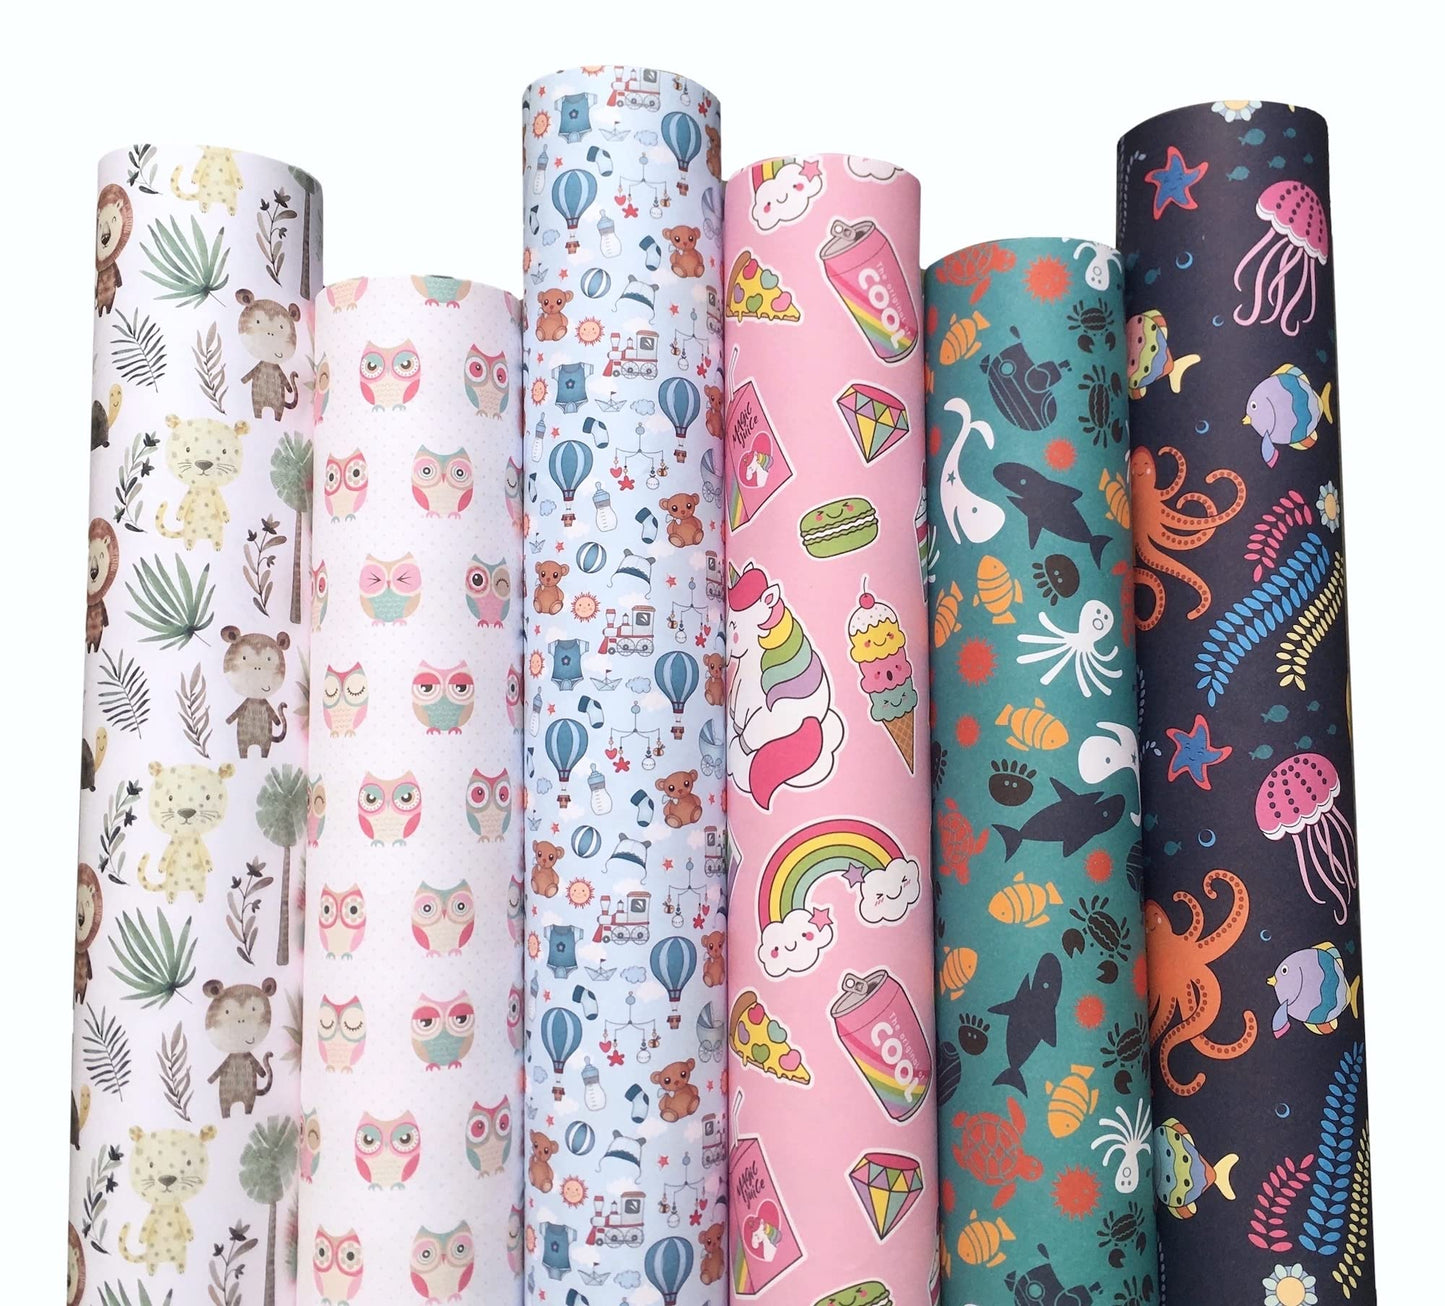 Aakar Pack of 6, Gift Wrapping Paper, 29 x 19 inches, Wrapping Paper, Gift Wrapping Paper Roll, Gift Wrapping, Wrapping Paper Roll, Gift Wrap, Wrapping Paper Birthday, Gift Wrapper (Toddler Pack)